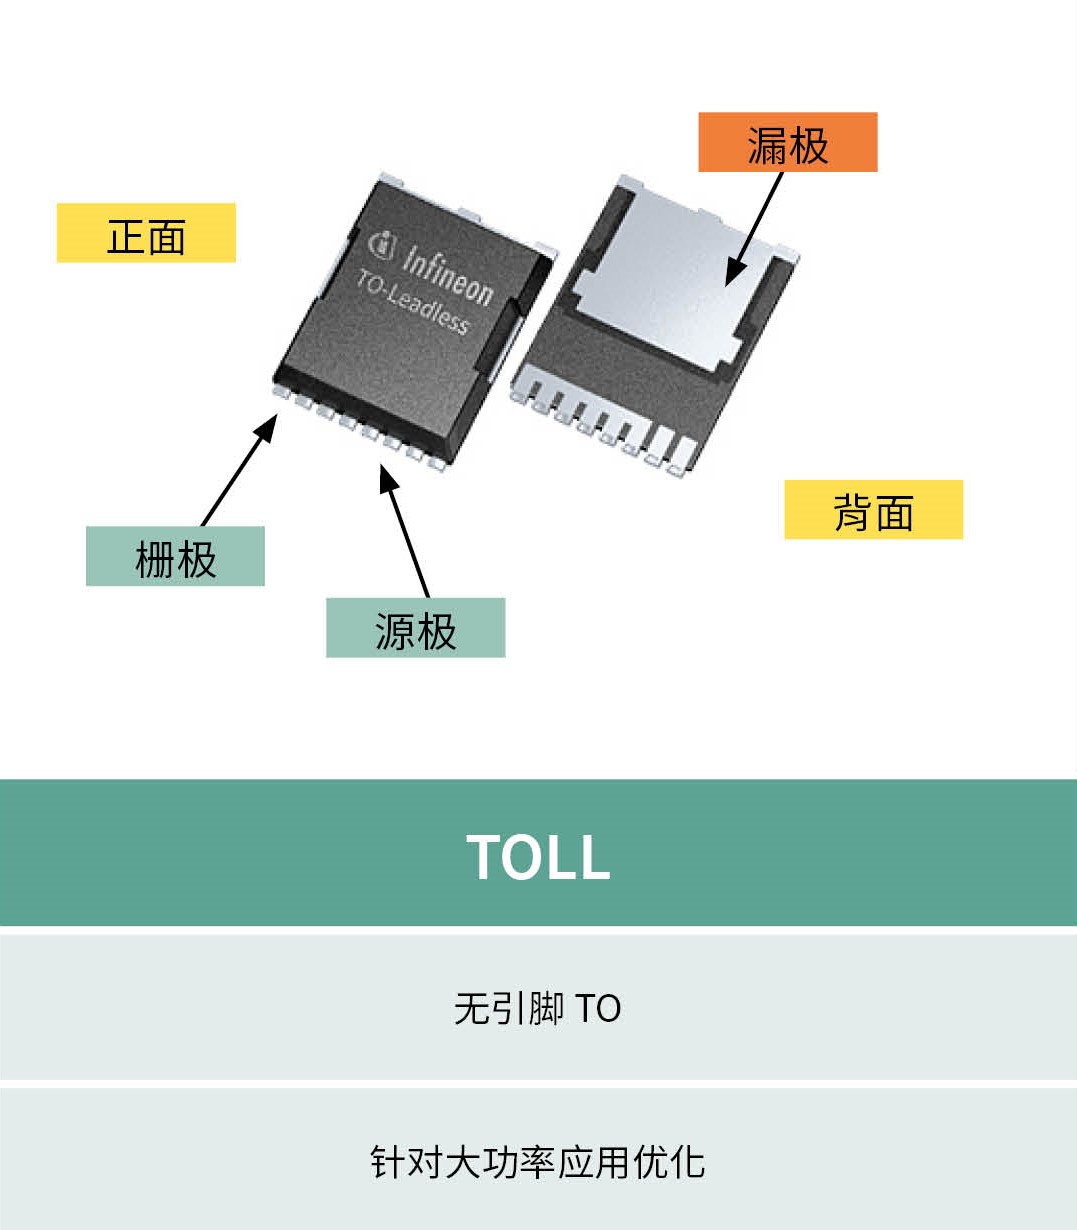 Infineon TOLx TOLL package details